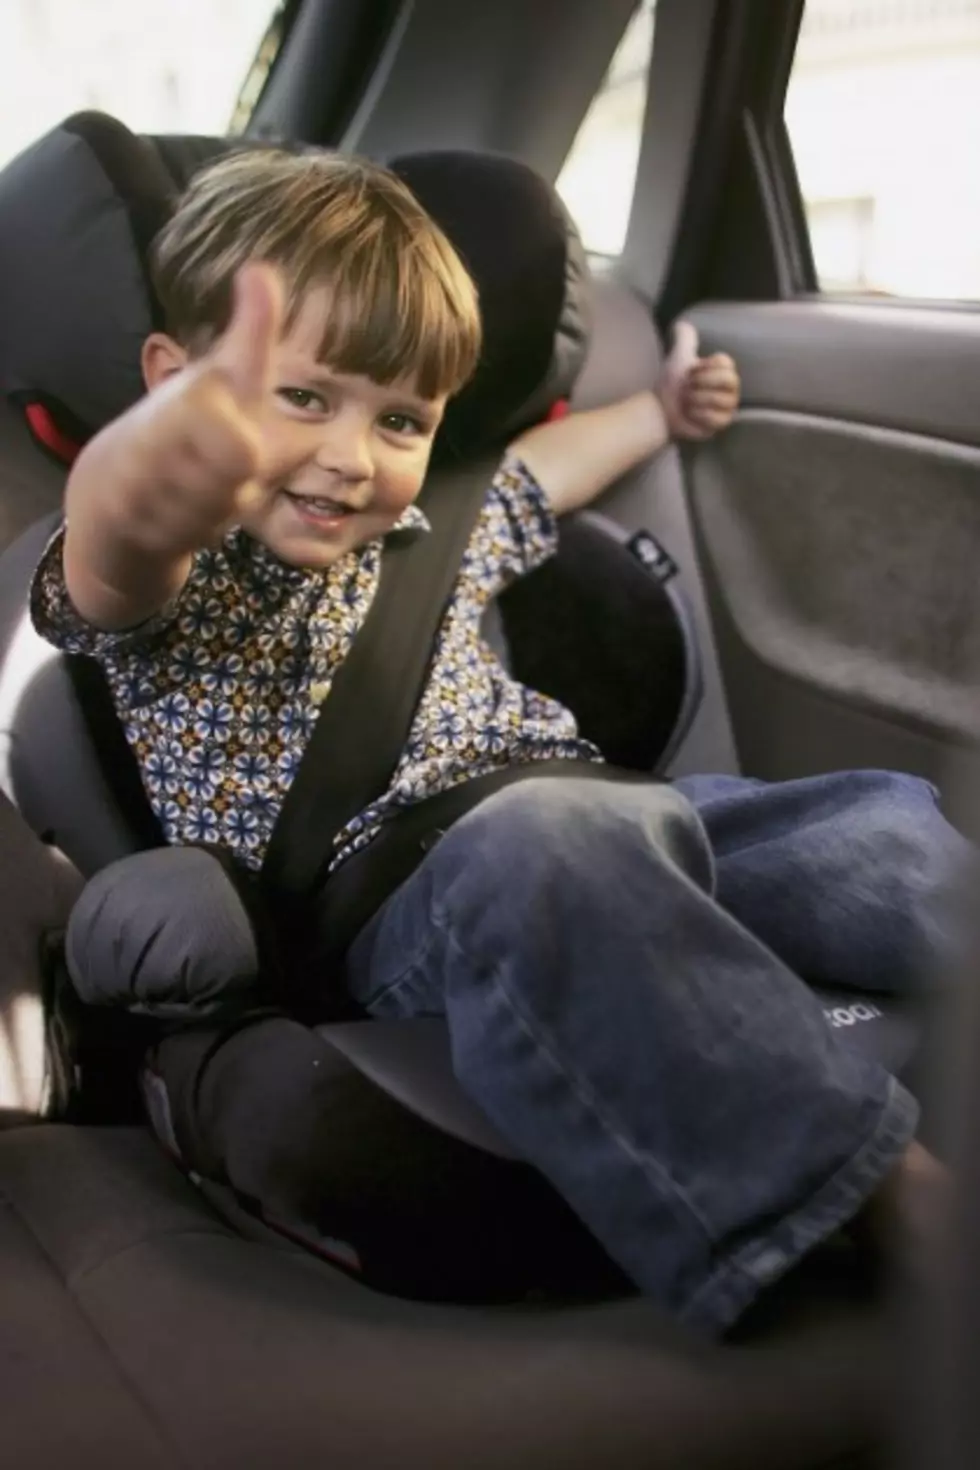 Child Seat Recall Now is Fourth Largest in U.S. History